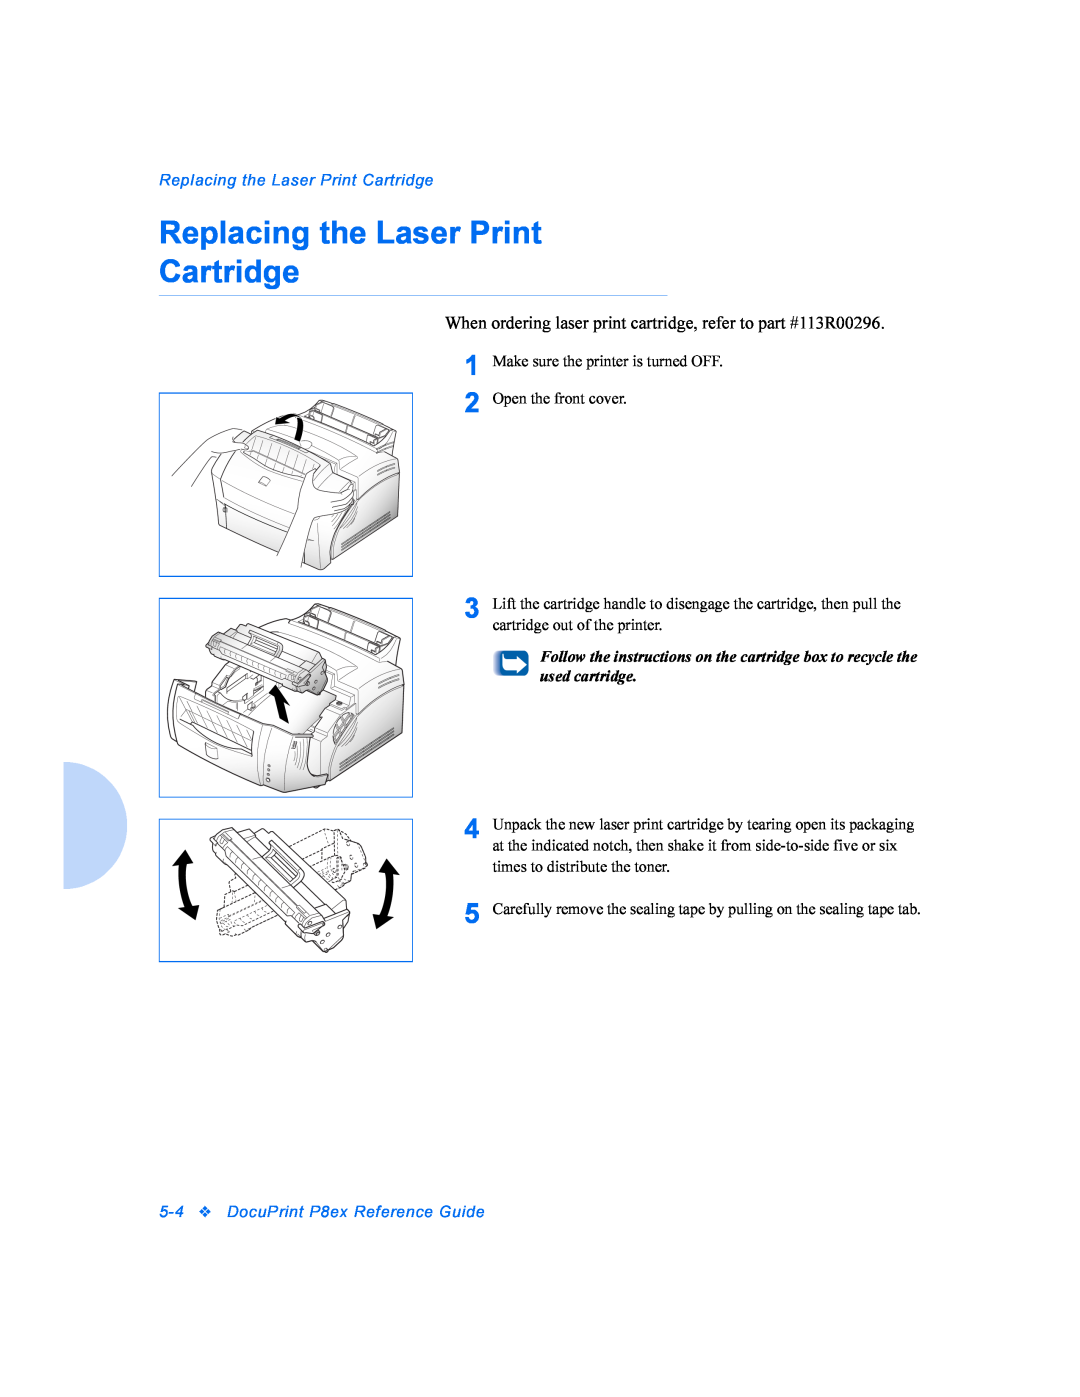 Xerox manual Replacing the Laser Print Cartridge, 5-4DocuPrint P8ex Reference Guide 